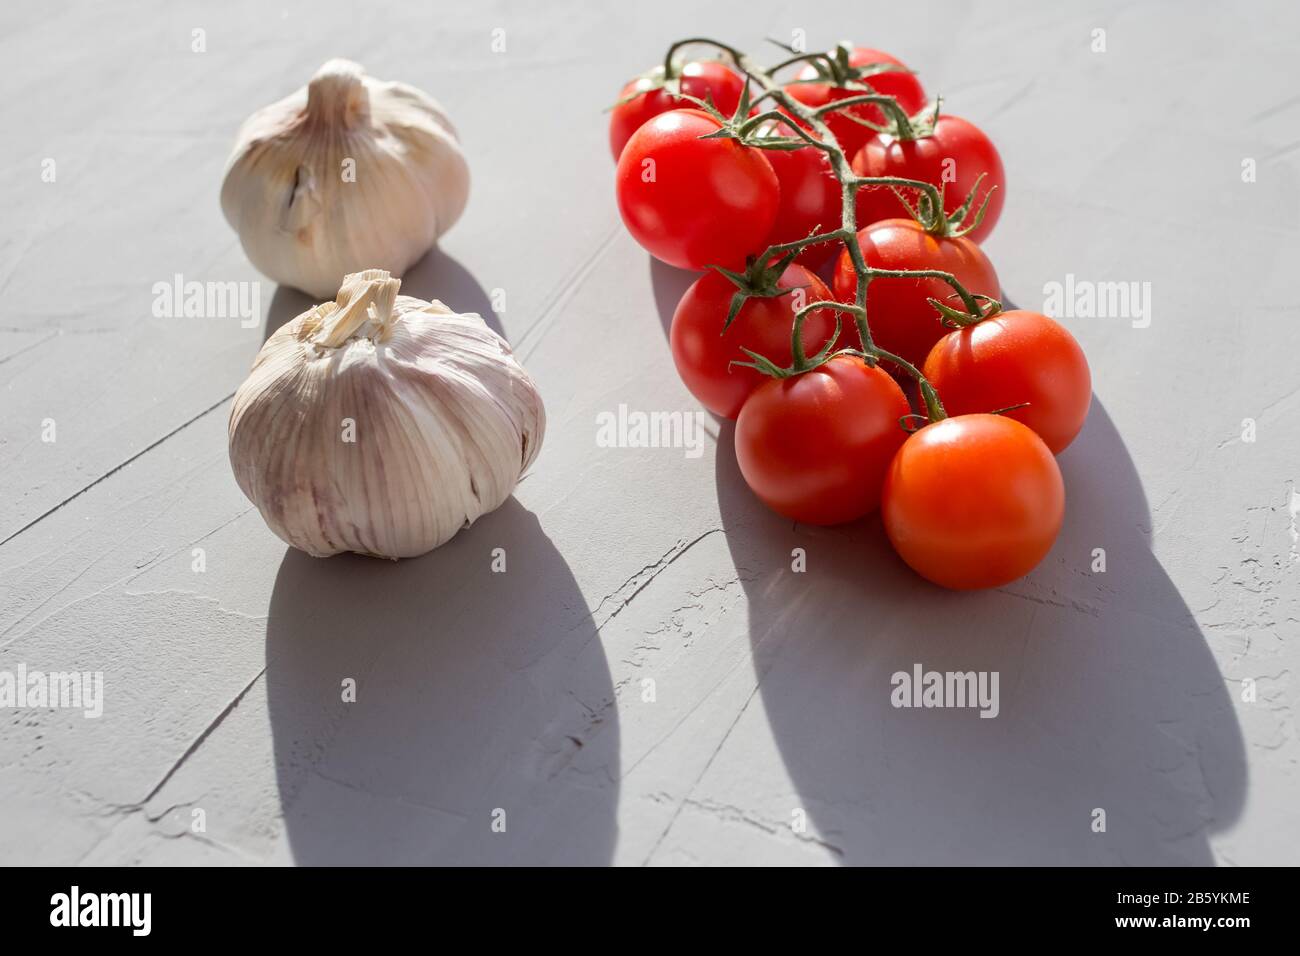 Fresh tomatoes and garlic on a grey background. Ingredients for ketchup. Stock Photo